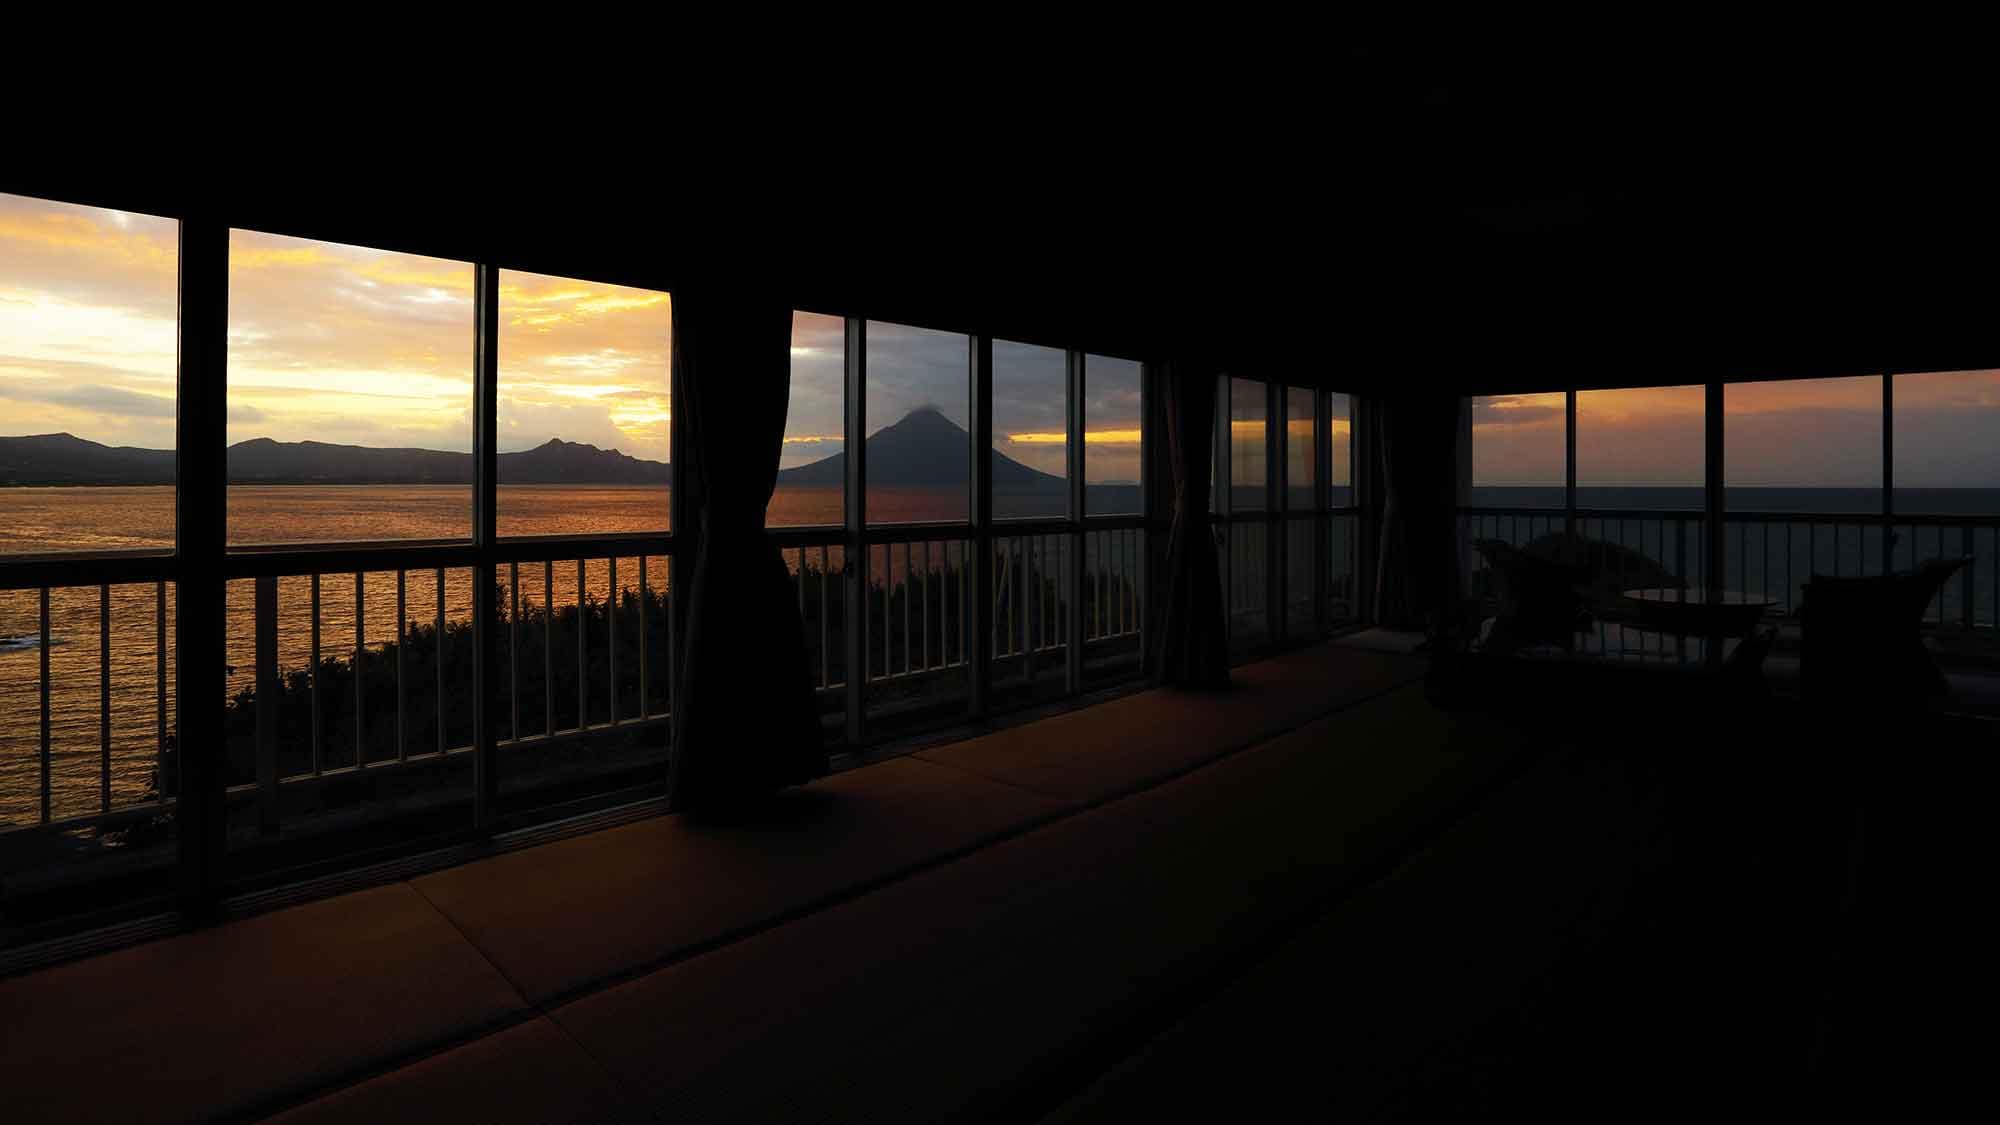 ・[Example of 16 tatami mat Japanese-style room] You can see a beautiful sunrise on a sunny day